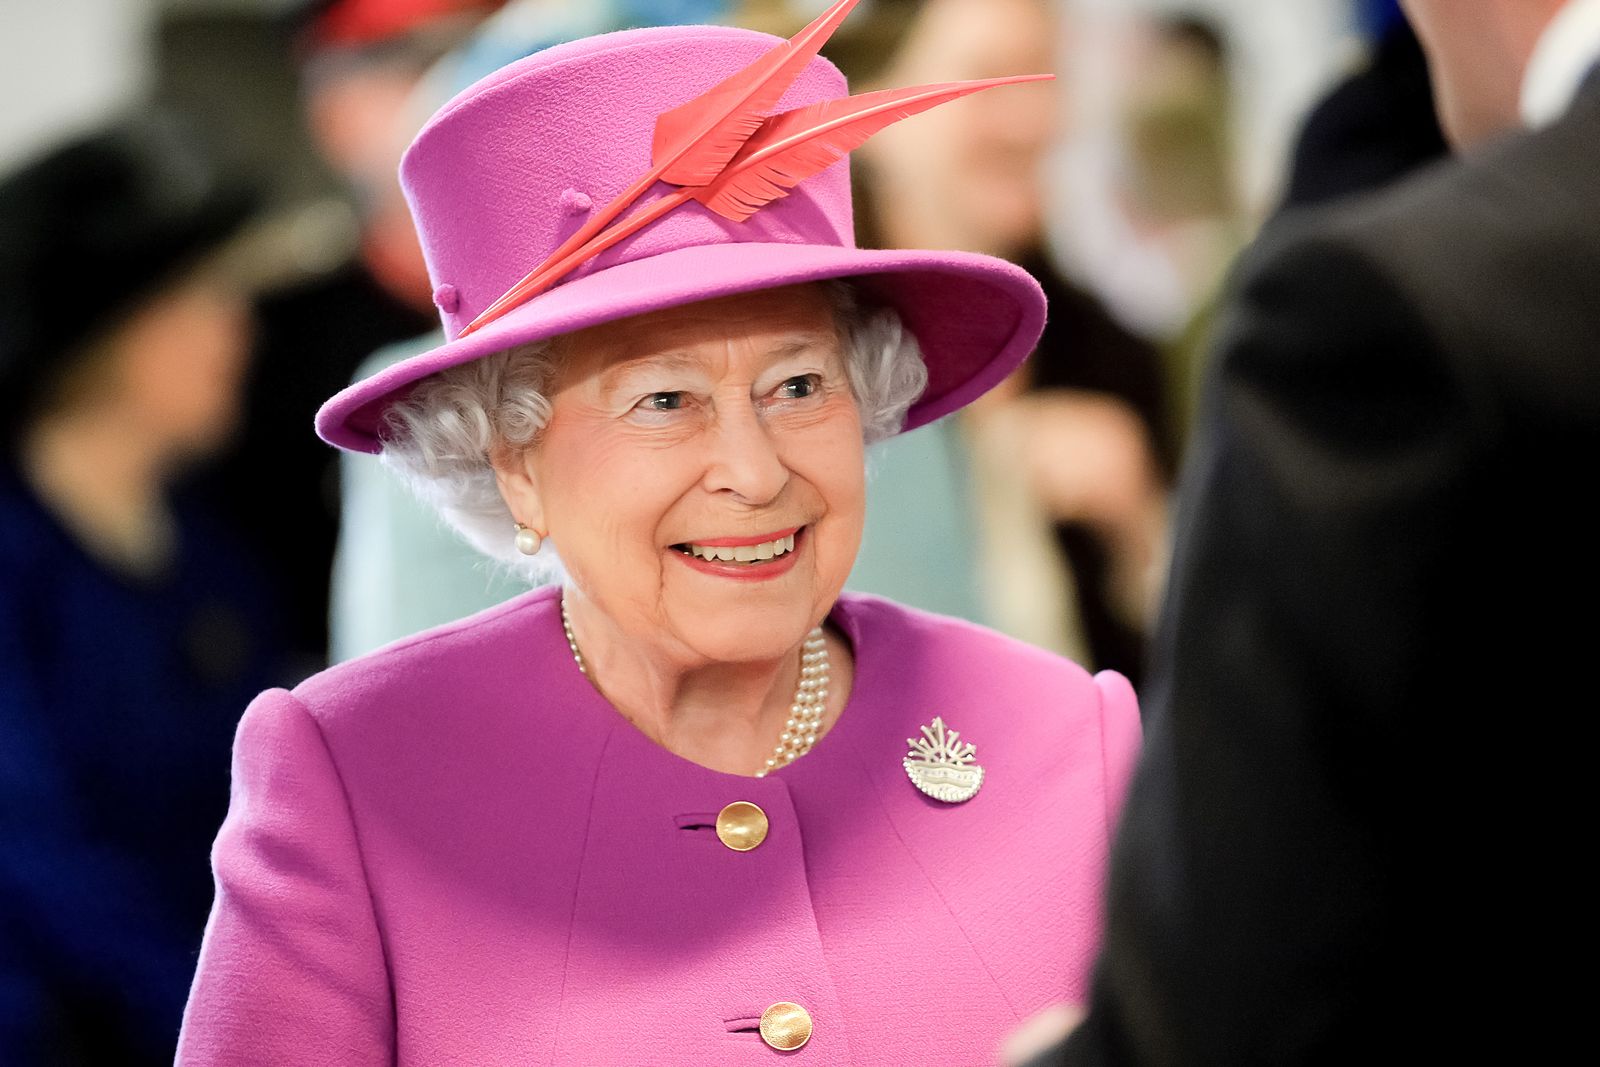 Queen Elizabeth II: a modernizer who steered the British monarchy into the 21st century